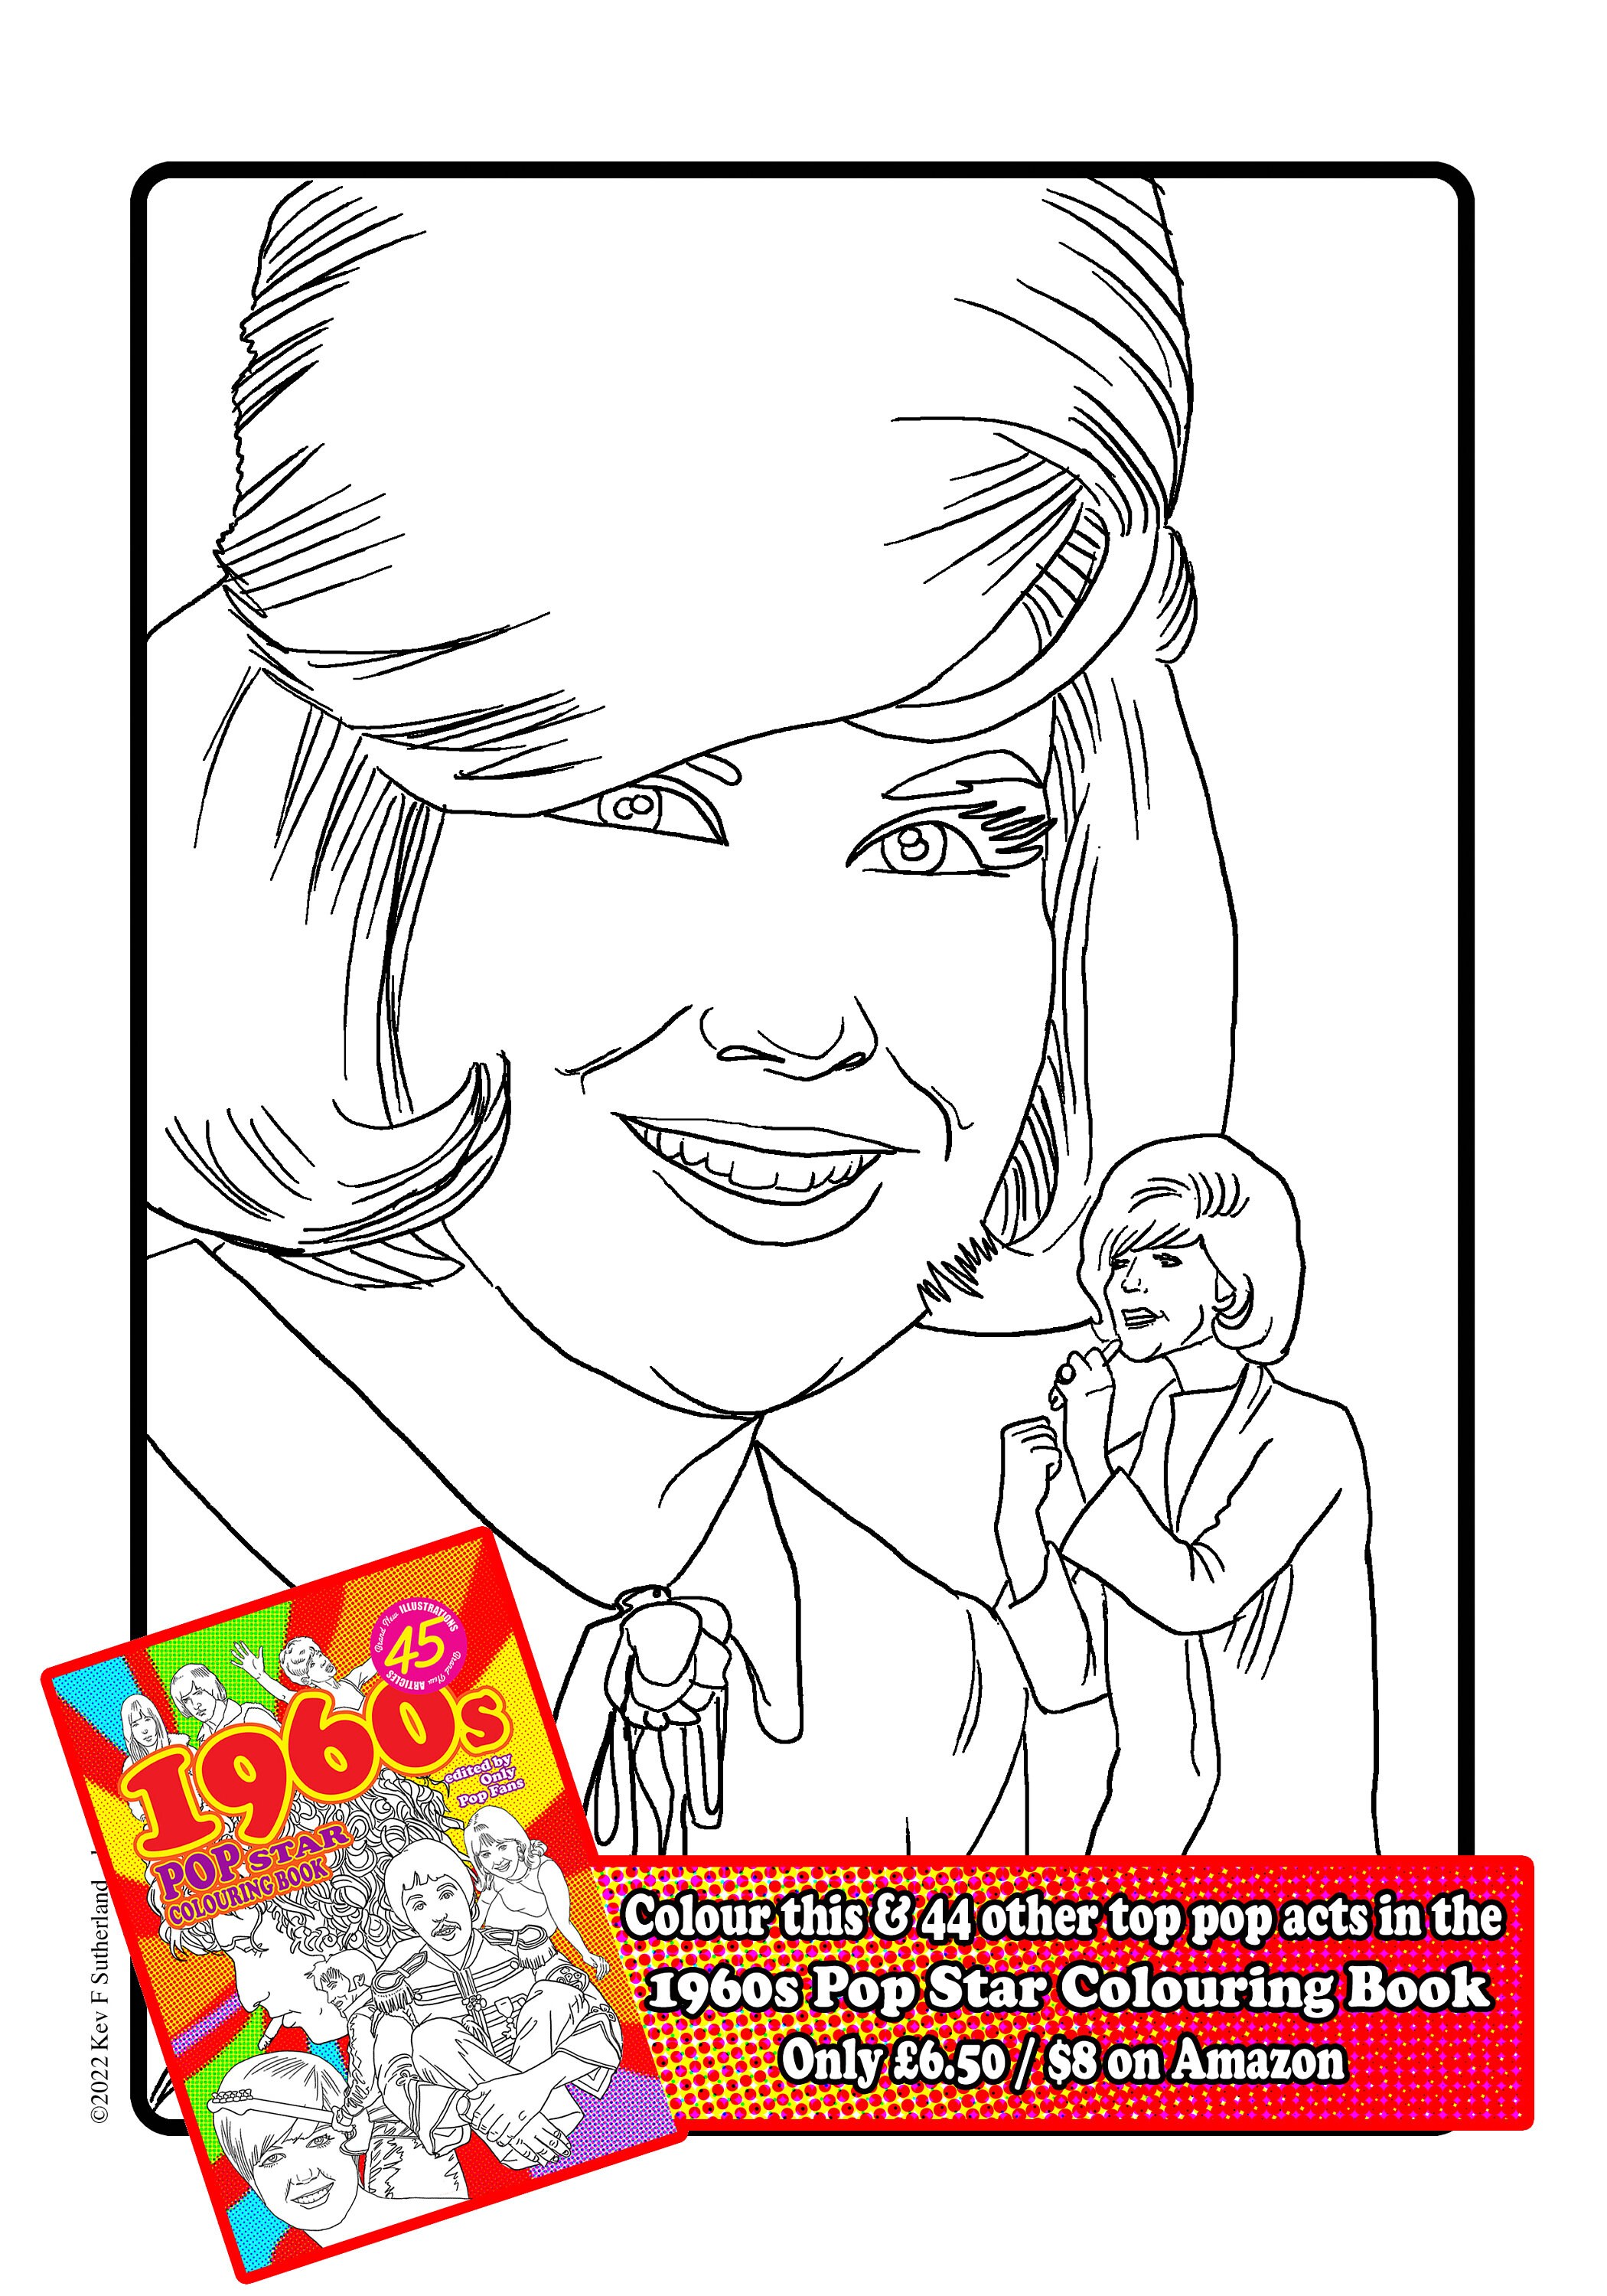 S pop star colouring book signed